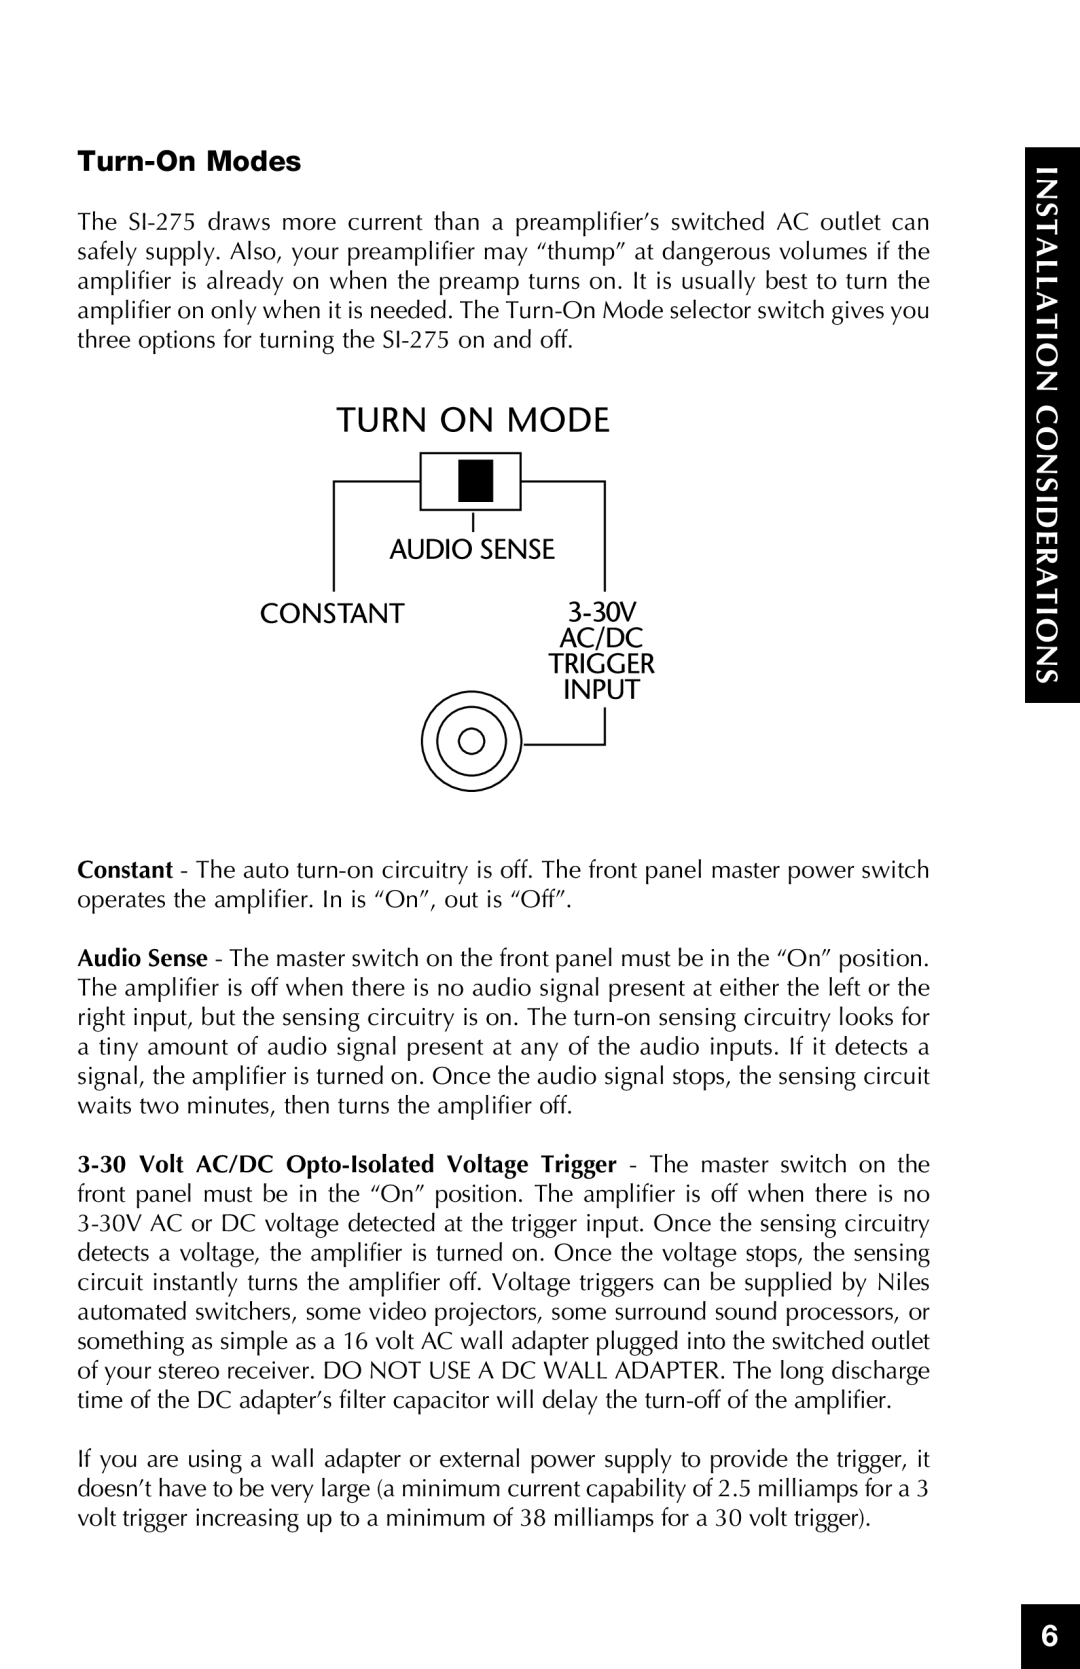 Niles Audio SI-275 manual Installation Considerations, Turn-OnModes 